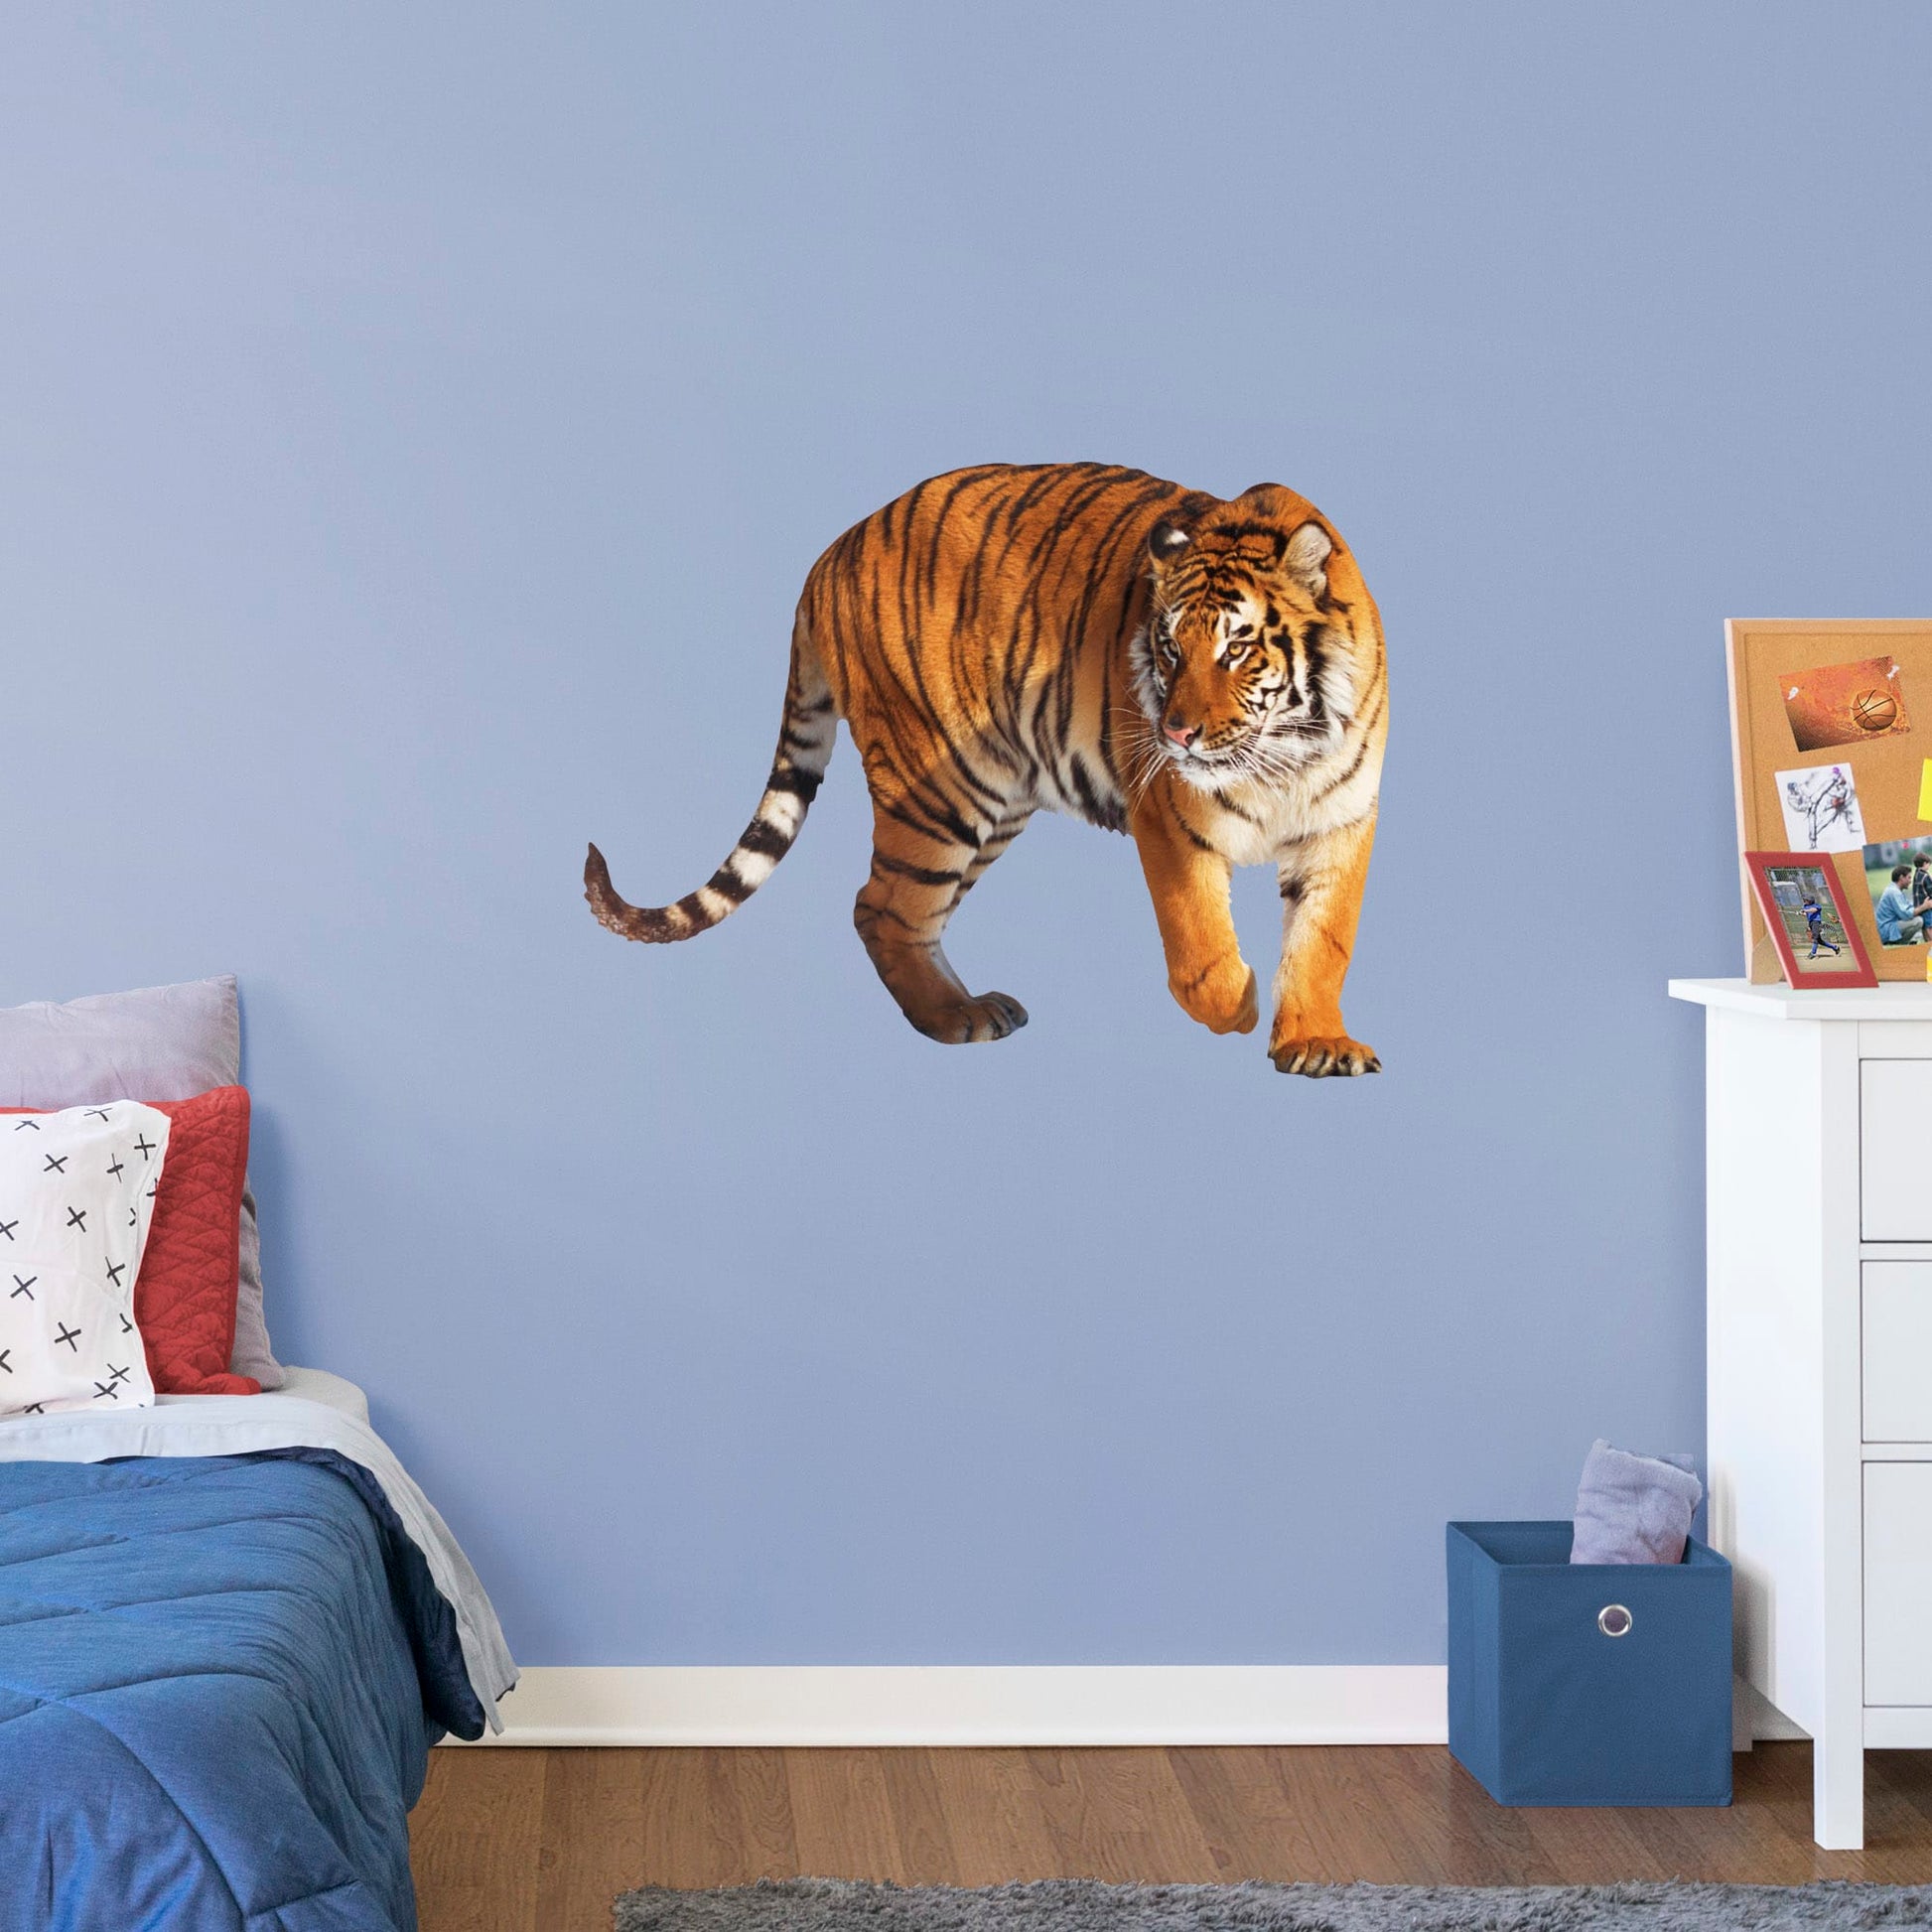 Life-Size Animal + 2 Licensed Decals (69"W x 53"H)